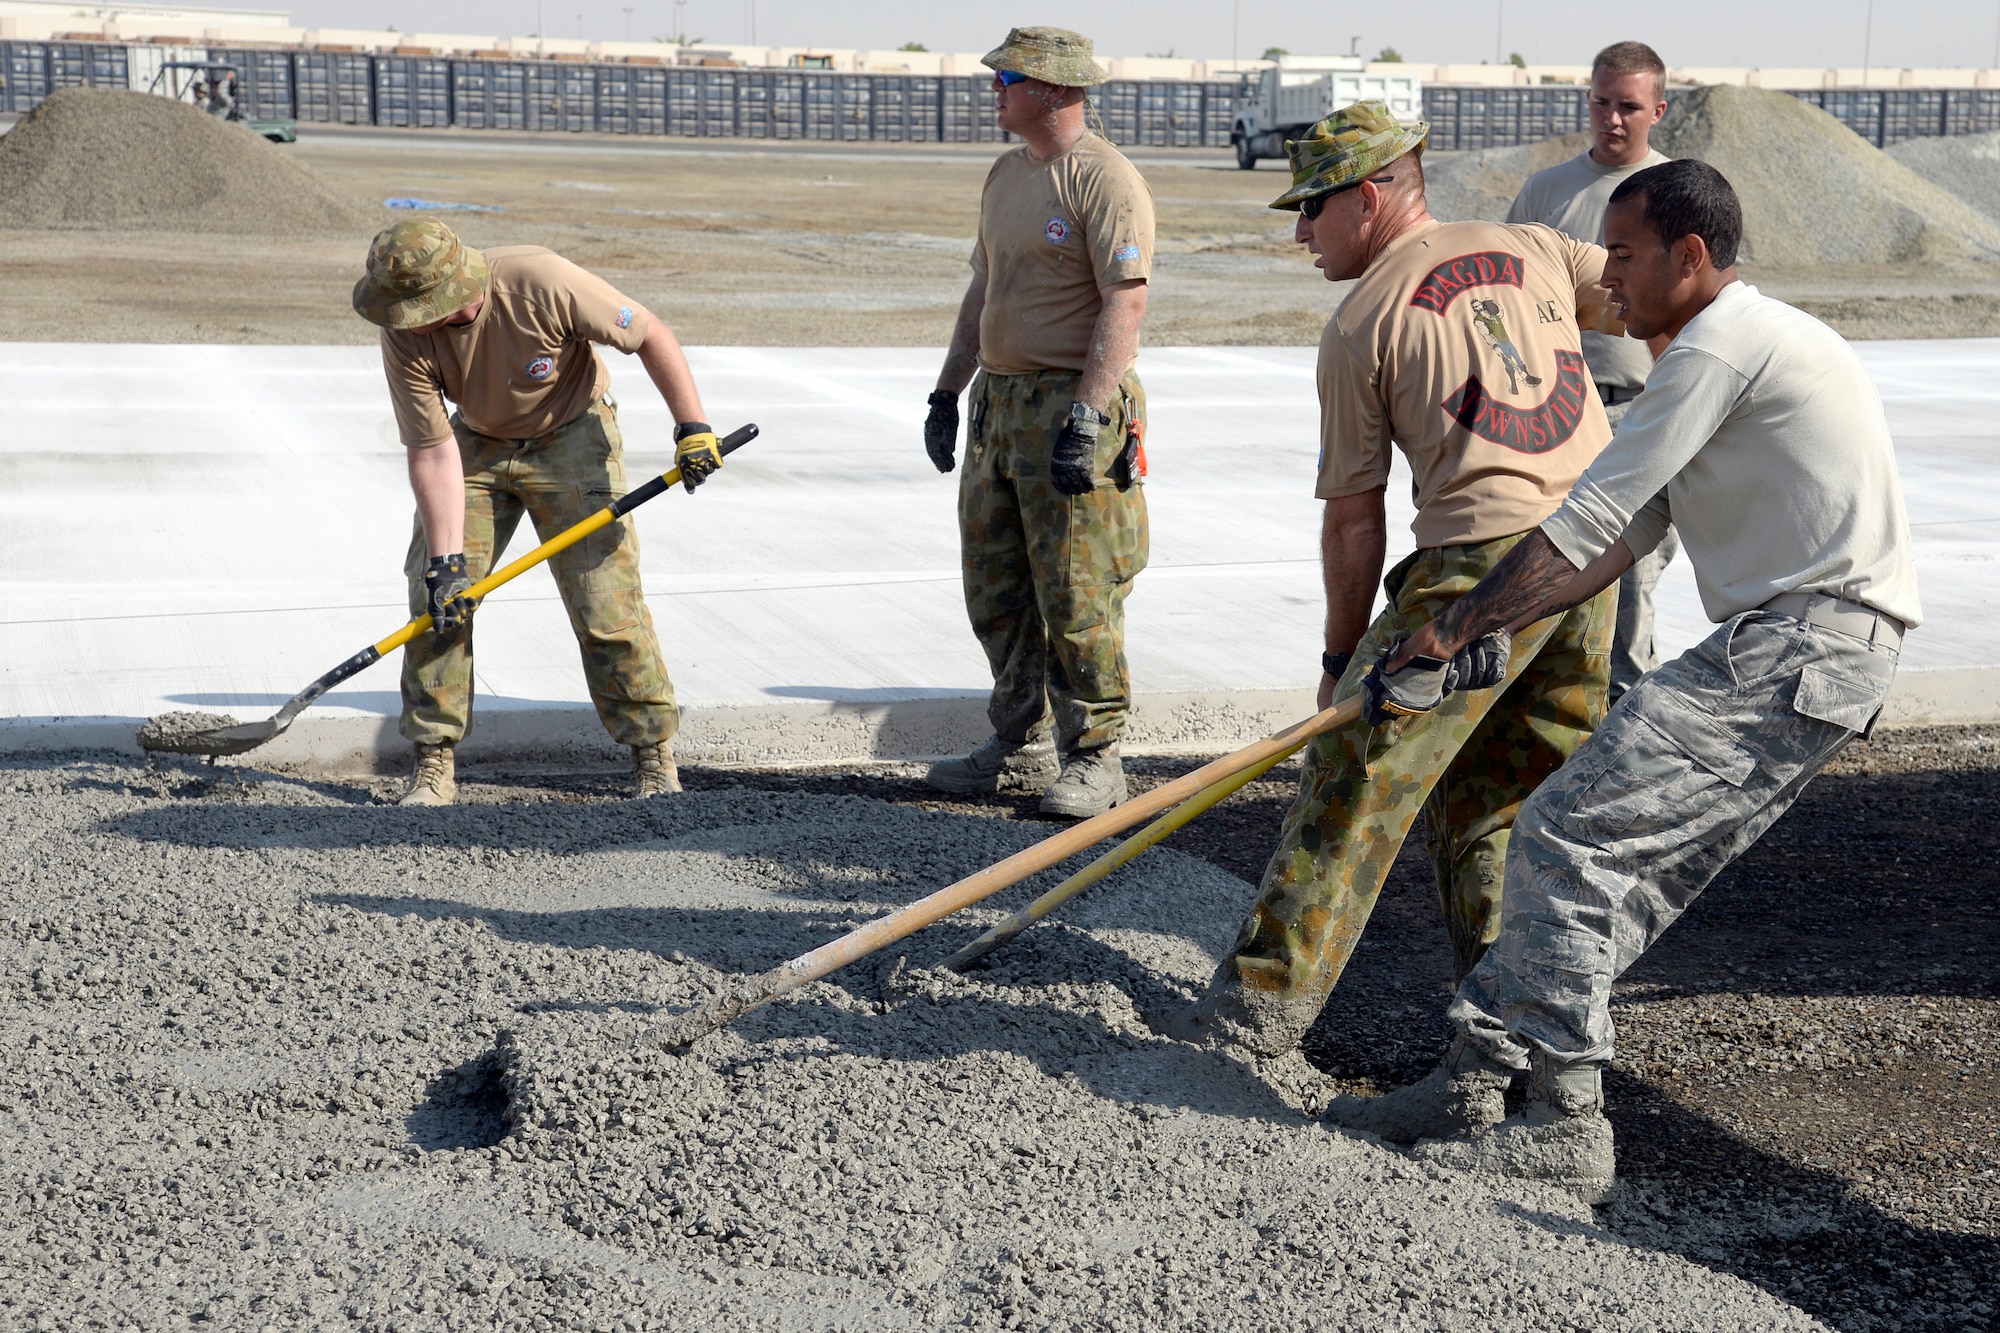 Airmen with the Expeditionary Civil Engineer Squadron work side-by-side with Australians from the Royal Australian Air Force Air Task Group to lay concrete at the new Australian beddown site on an undisclosed location in Southwest Asia Oct. 30, 2014. Airmen with the ECES worked side-by-side with their Australian counterparts as they collectively constructed a beddown site from the ground up. (U.S. Air Force photo/Tech. Sgt. Marie Brown)